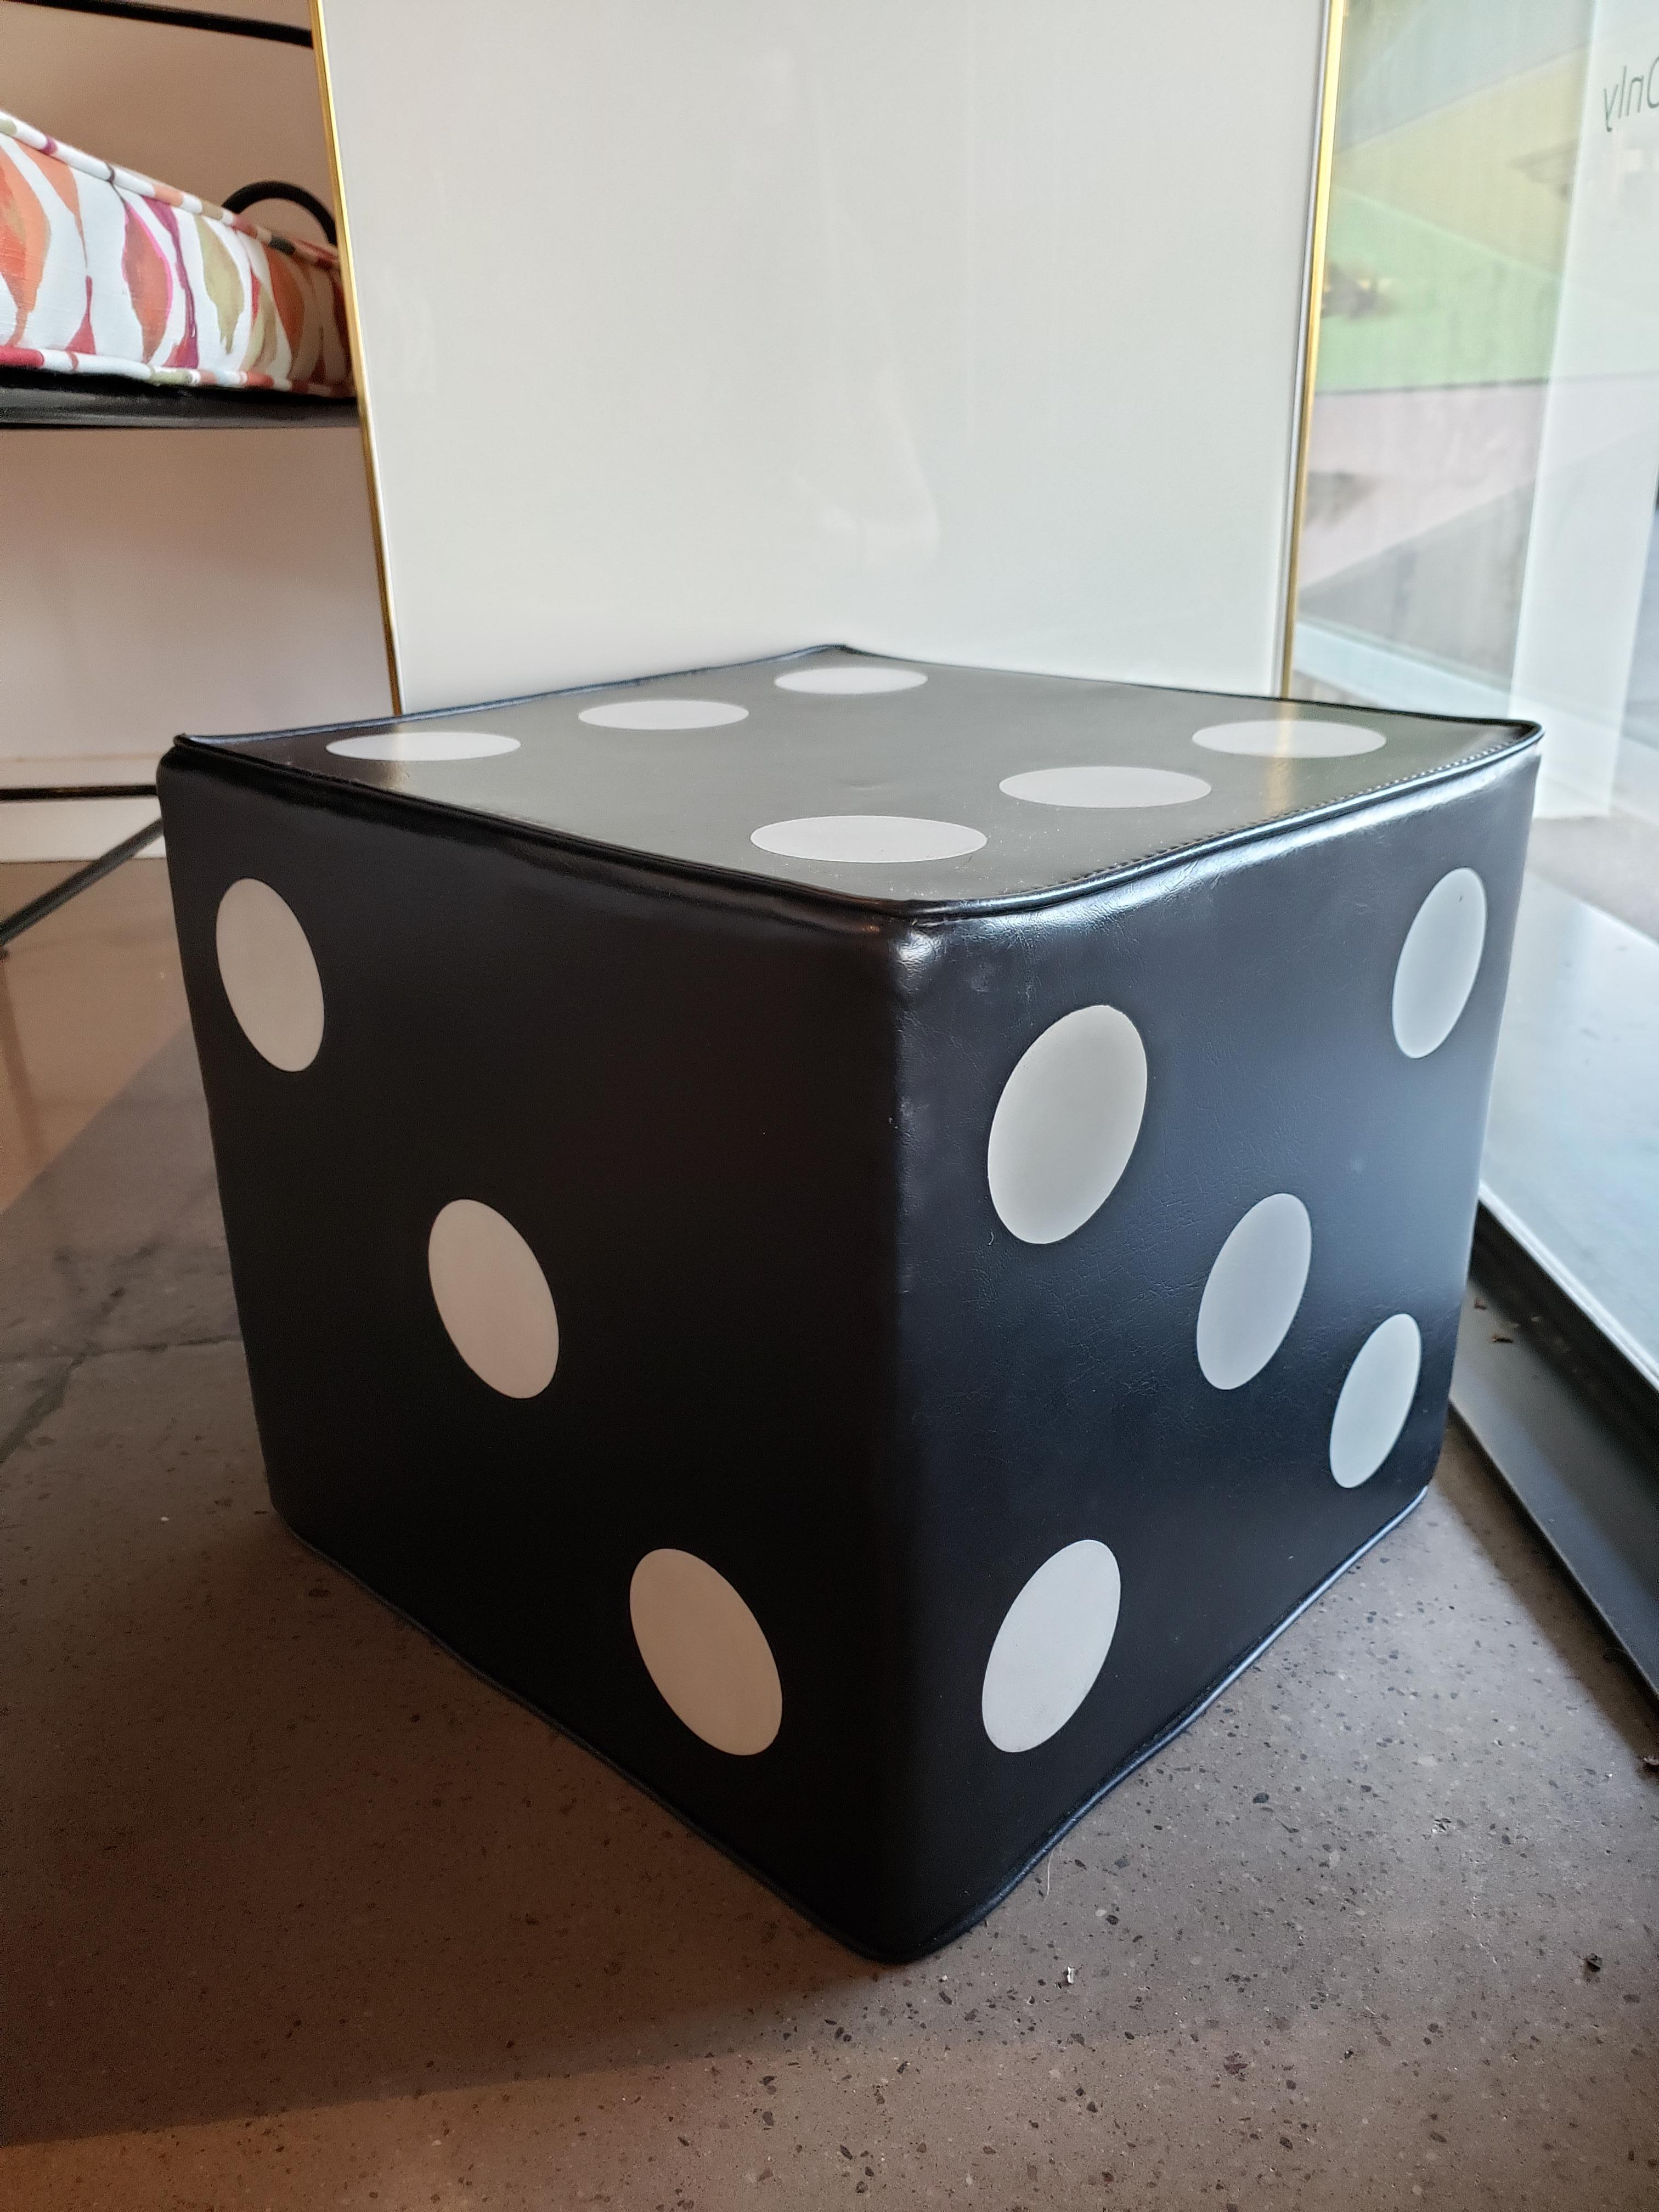 This vintage vinyl dice ottoman is sure to add a touch of whimsy to your interiors. Use as a tabletop sculpture or as an ottoman or side table with a small tray.